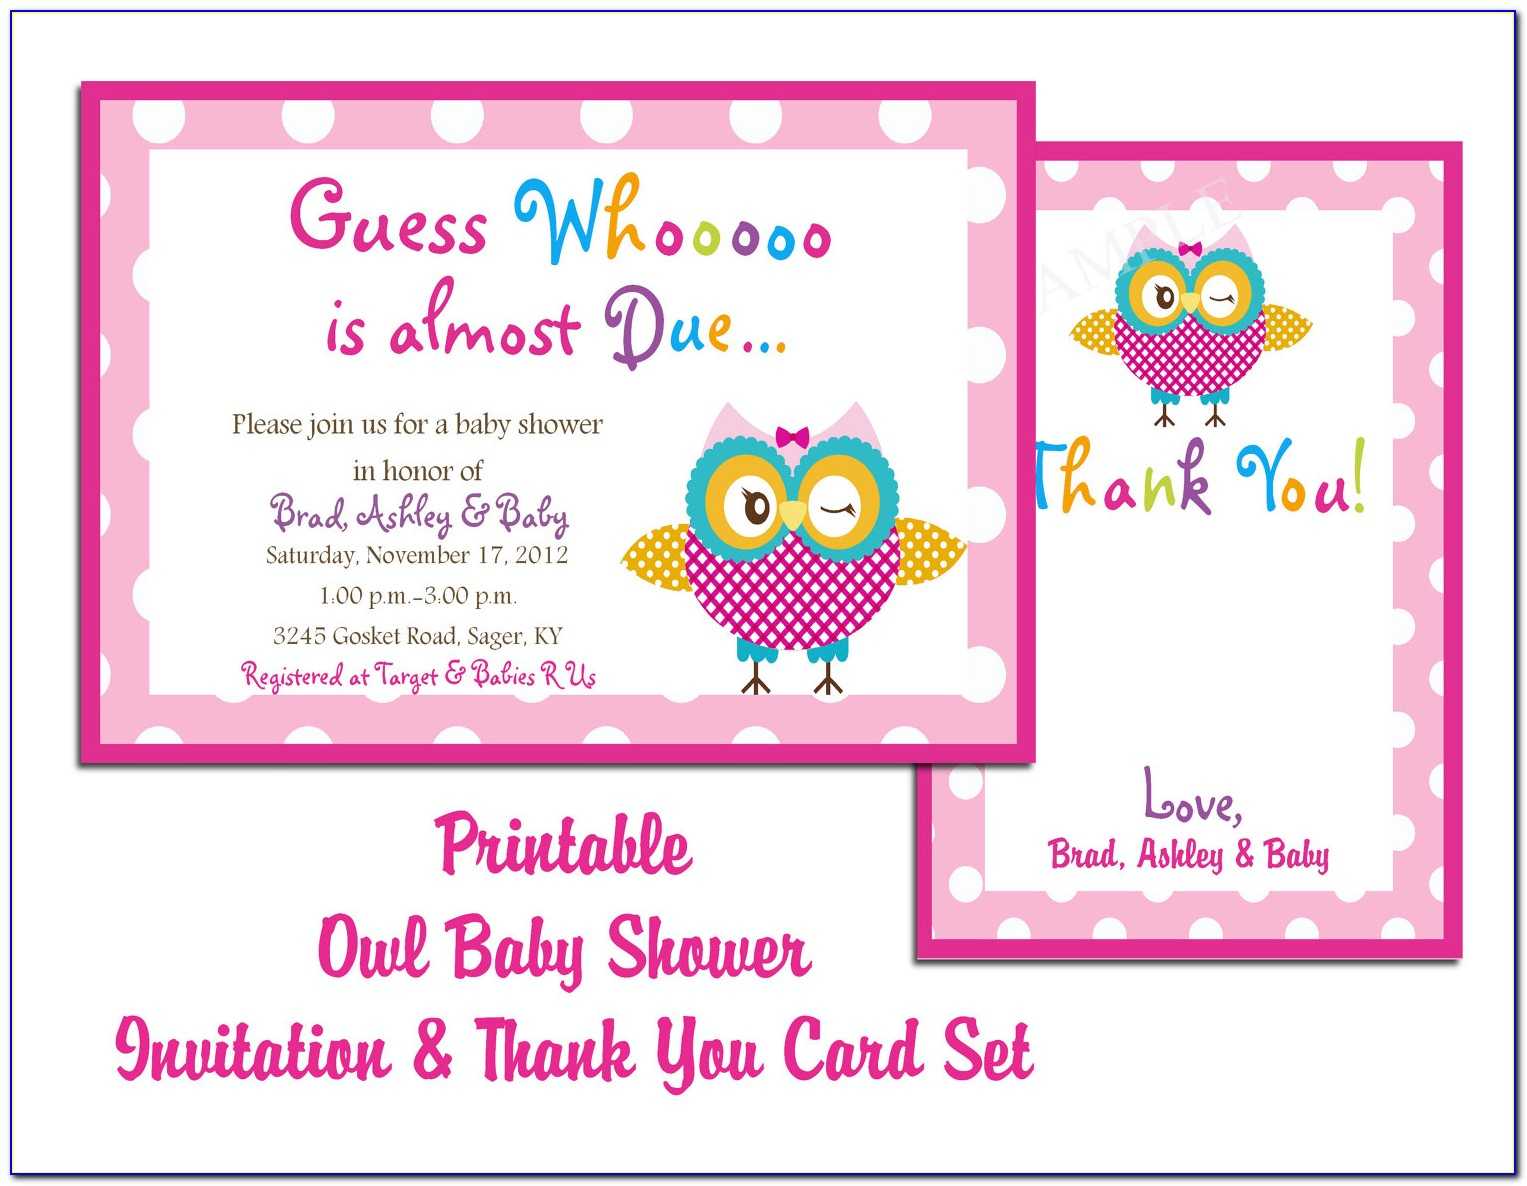 Thank You Card Template For Baby Shower Gift With Regard To Template For Baby Shower Thank You Cards